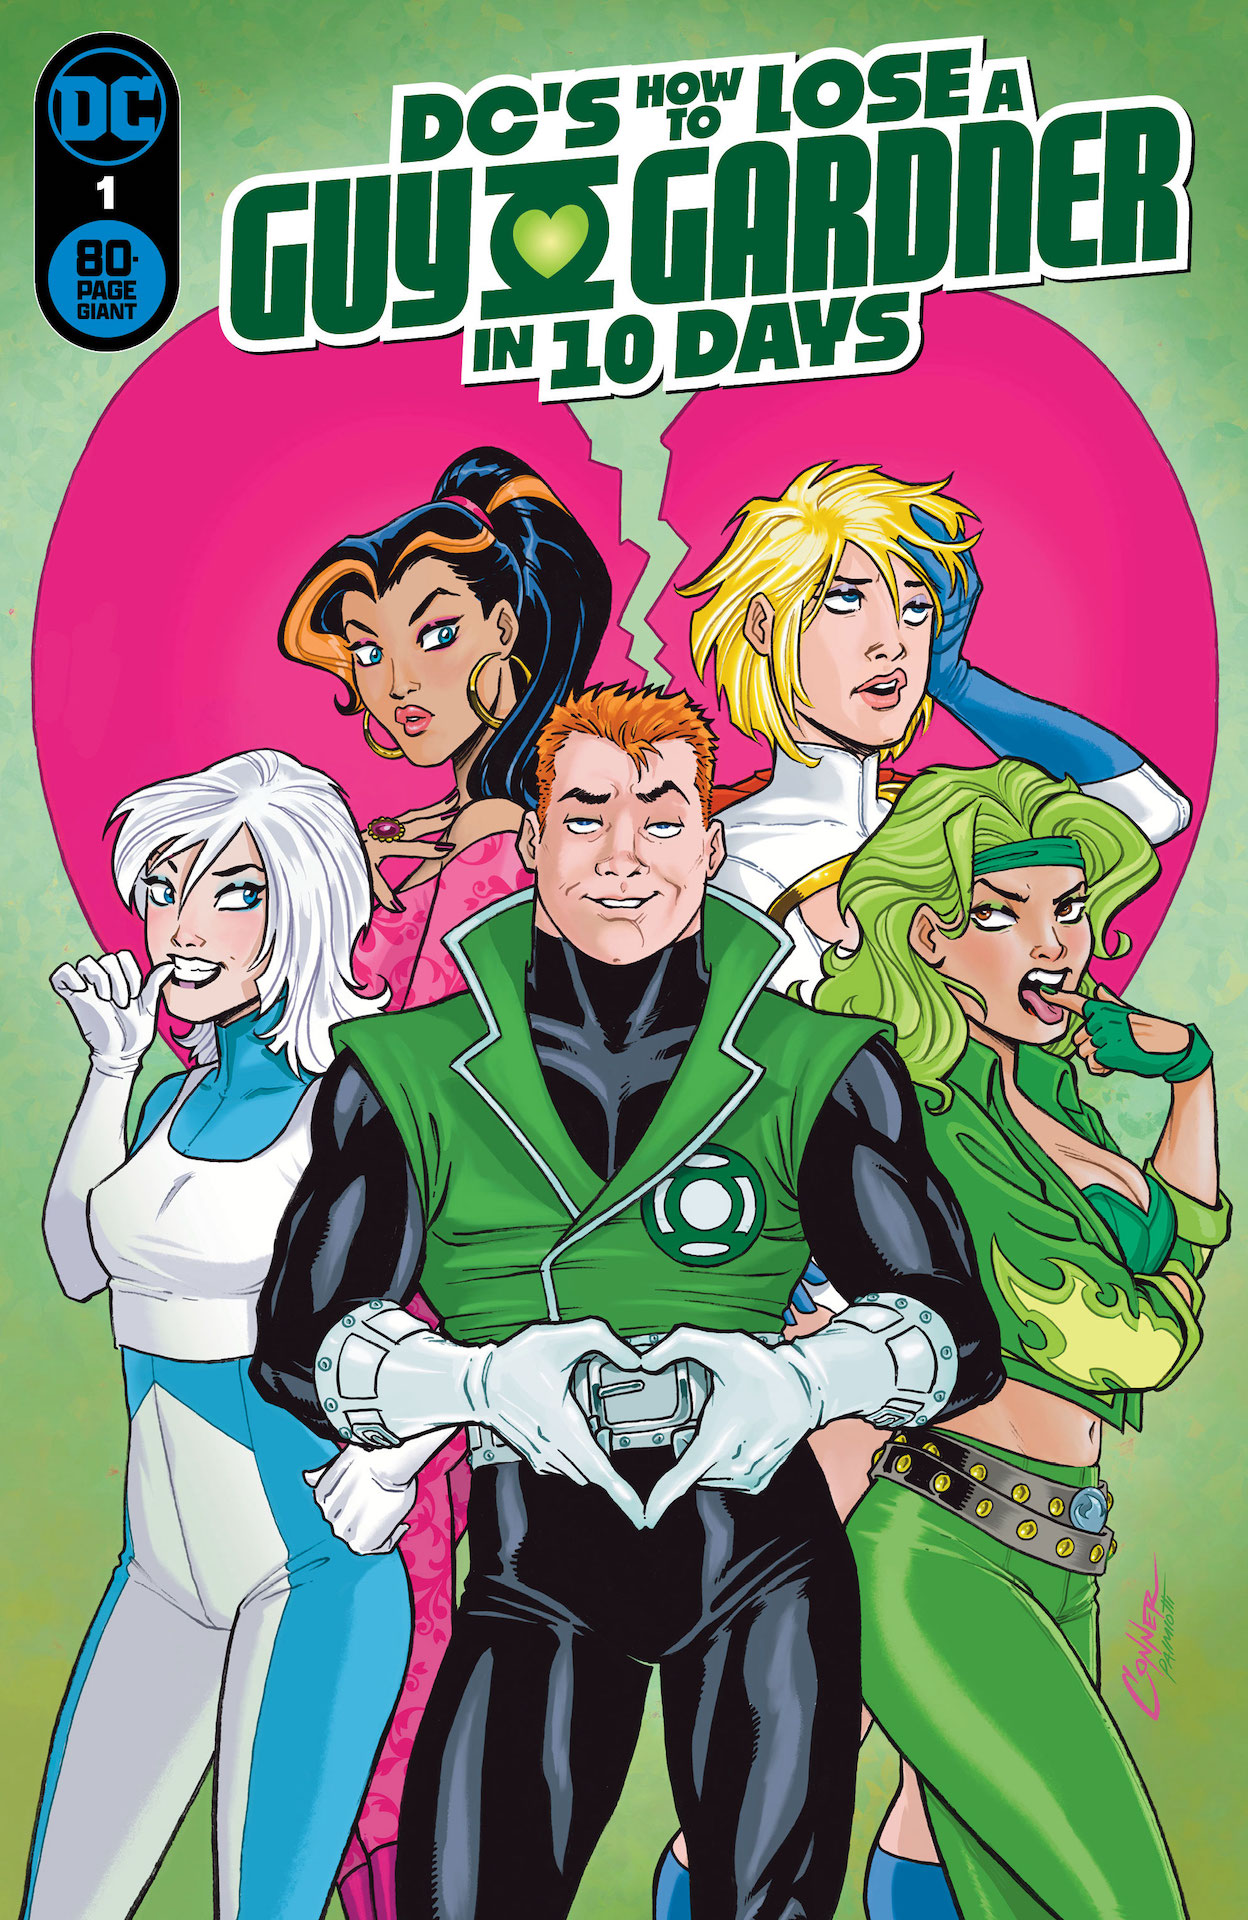 DC Preview: DC's How to Lose a Guy Gardner in 10 Days #1